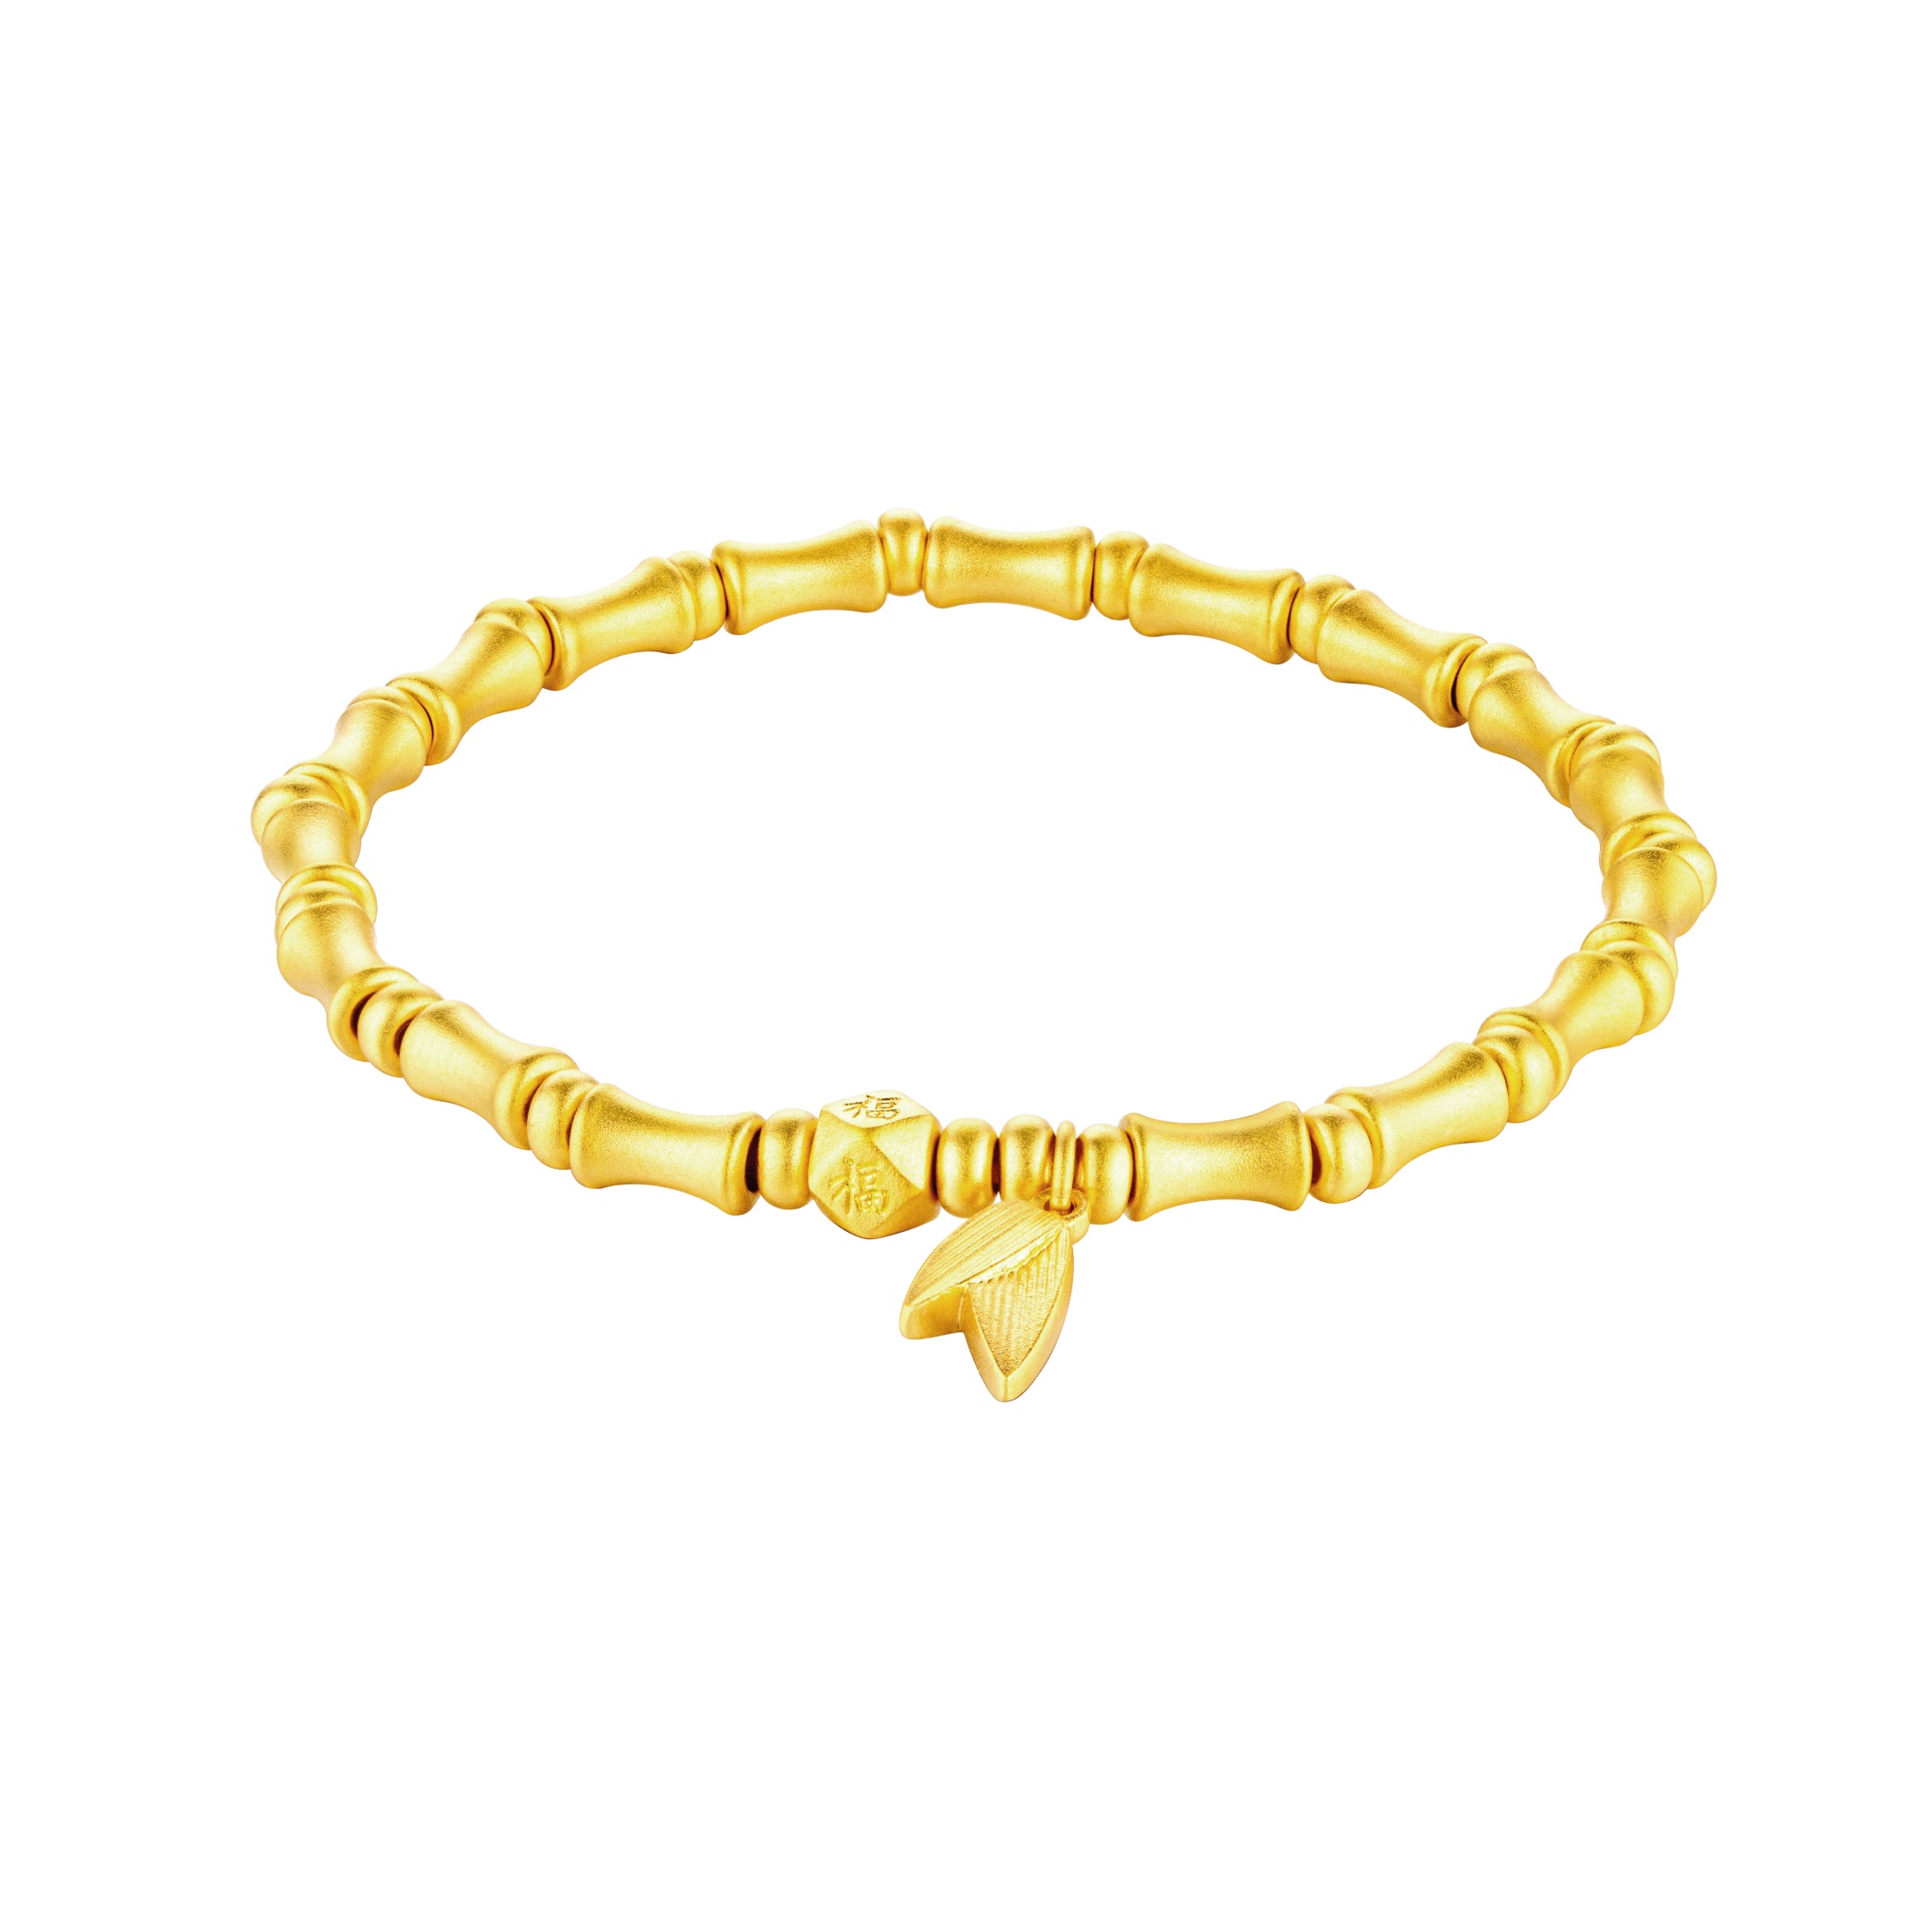 Heirloom Fortune Collection "Greatest Bless from Bamboo" Gold Bracelet